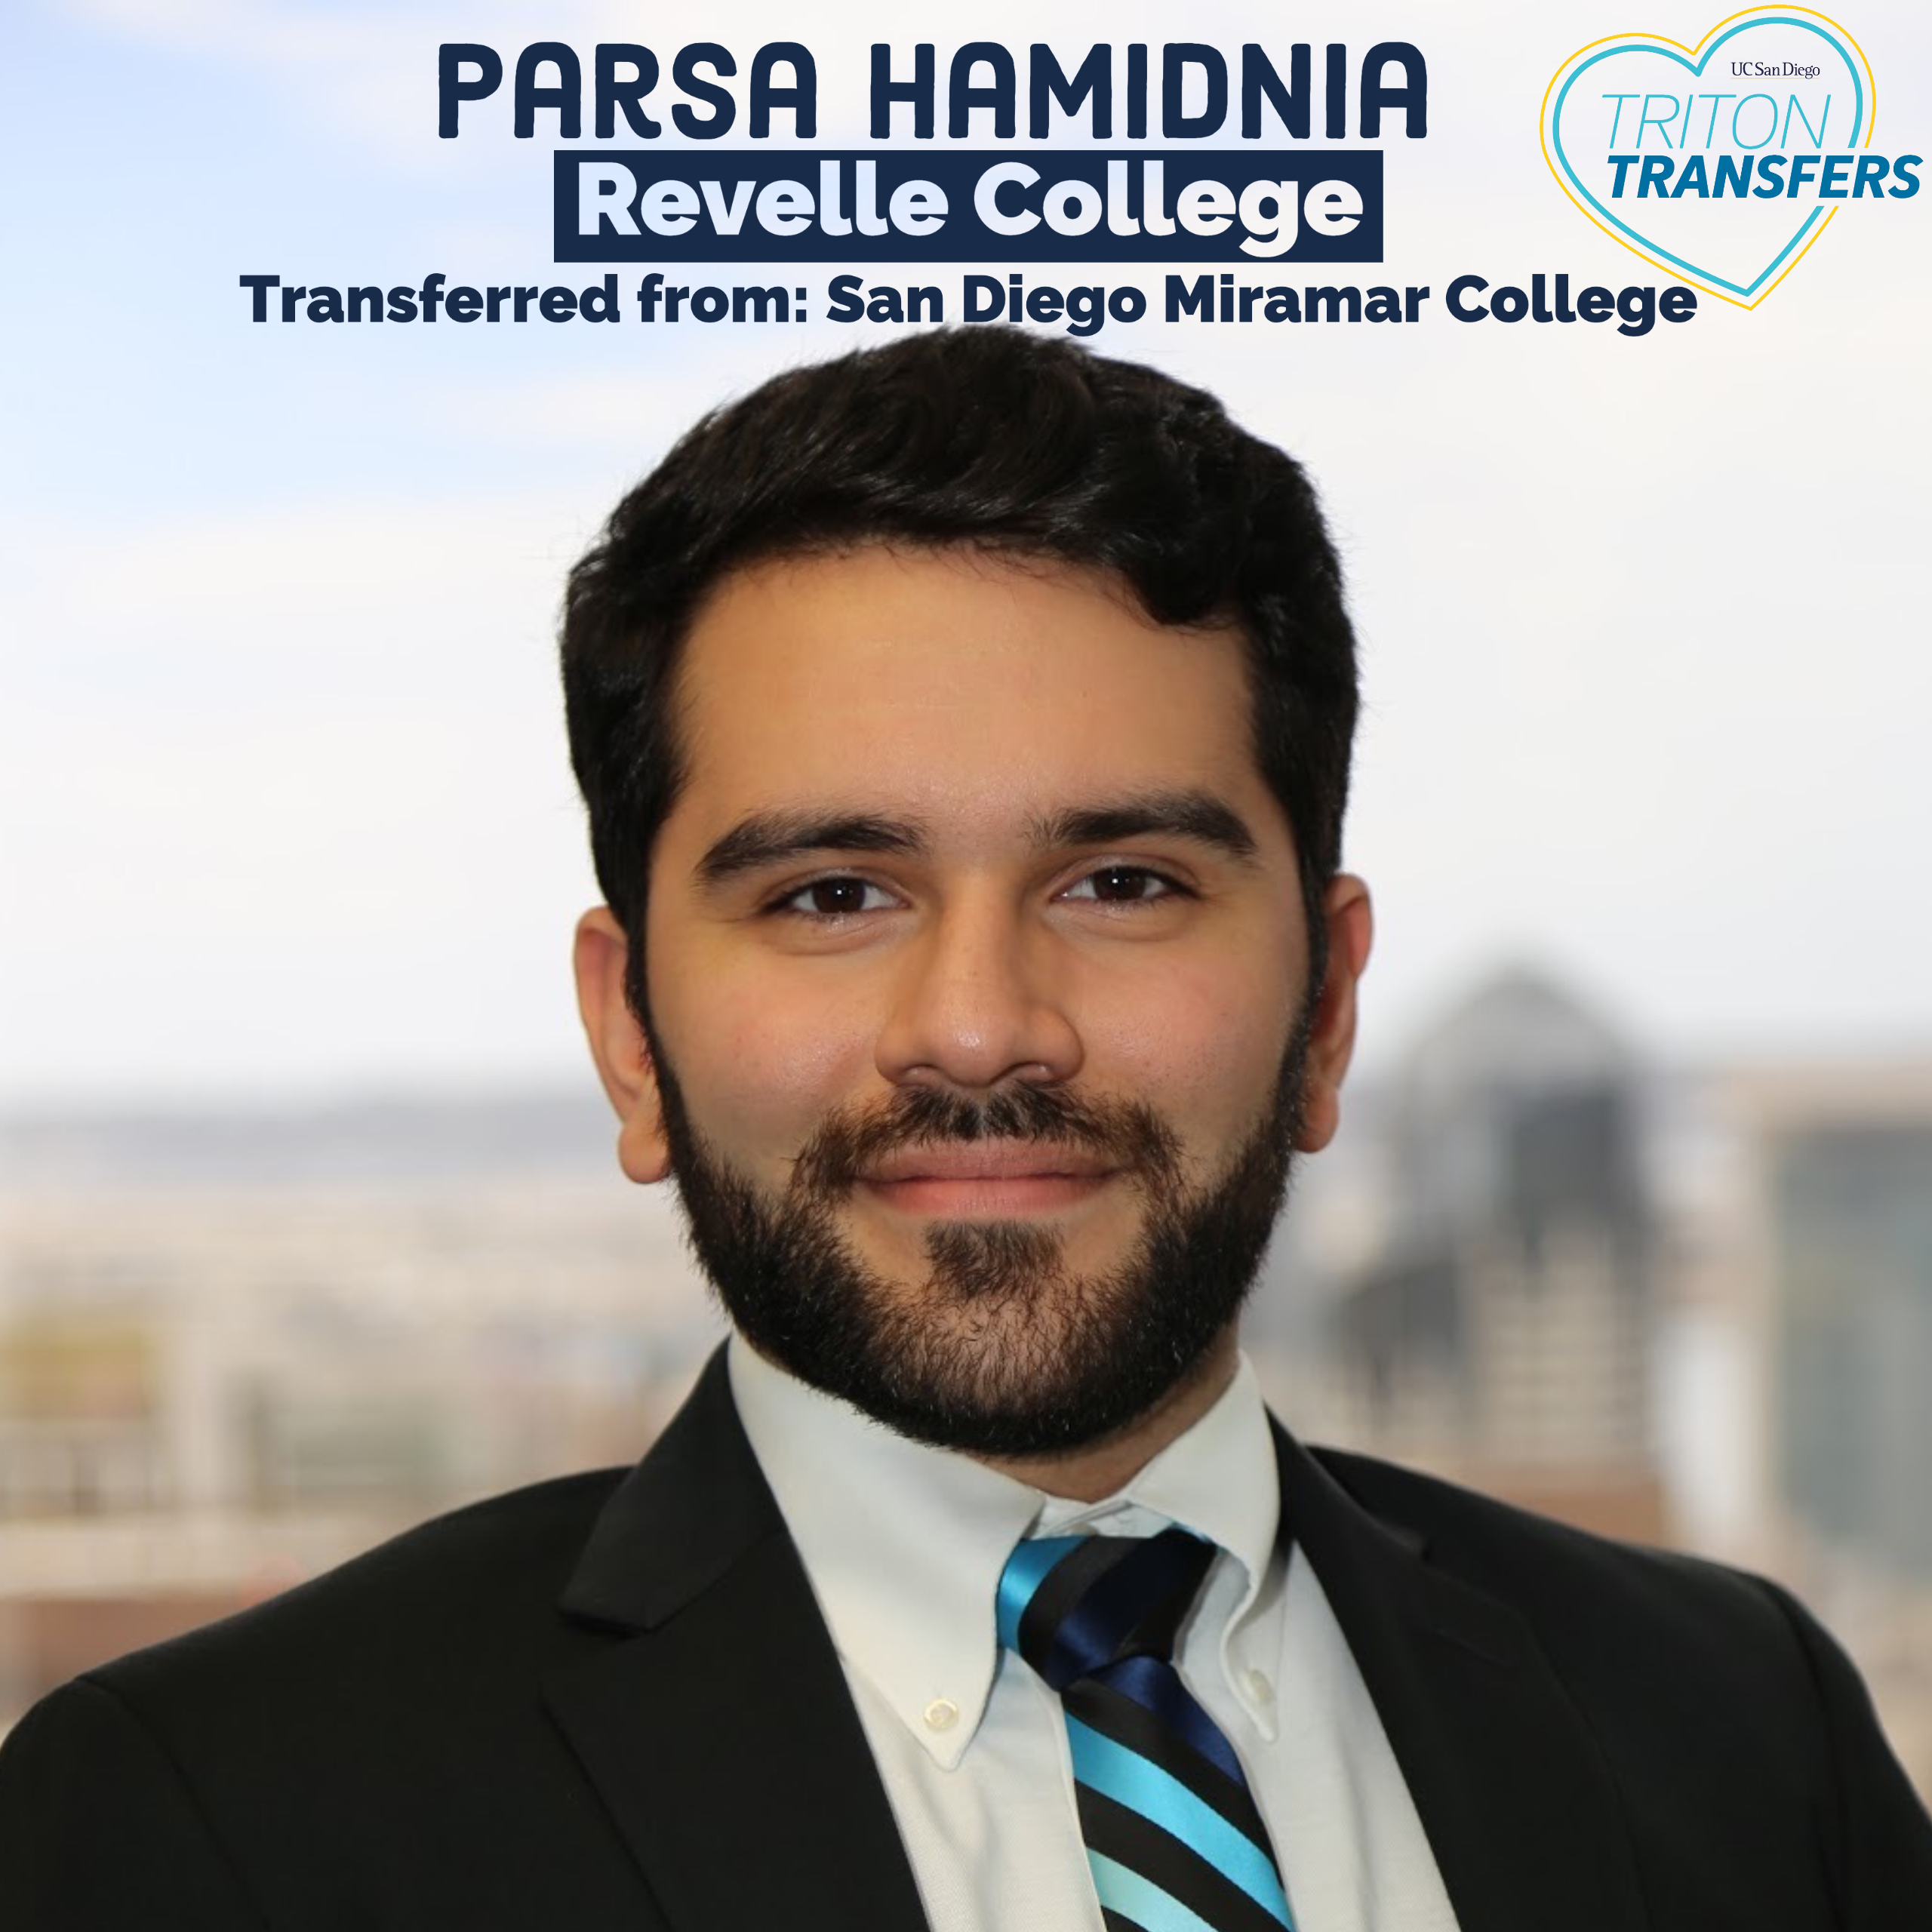 Parsa Hamidnia Revelle College Transferred from: San Diego Miramar College Major: Human Biology Minor: Psychology Advice: Take your harder major requirements early on to enjoy your last quarter with more manageable classes!